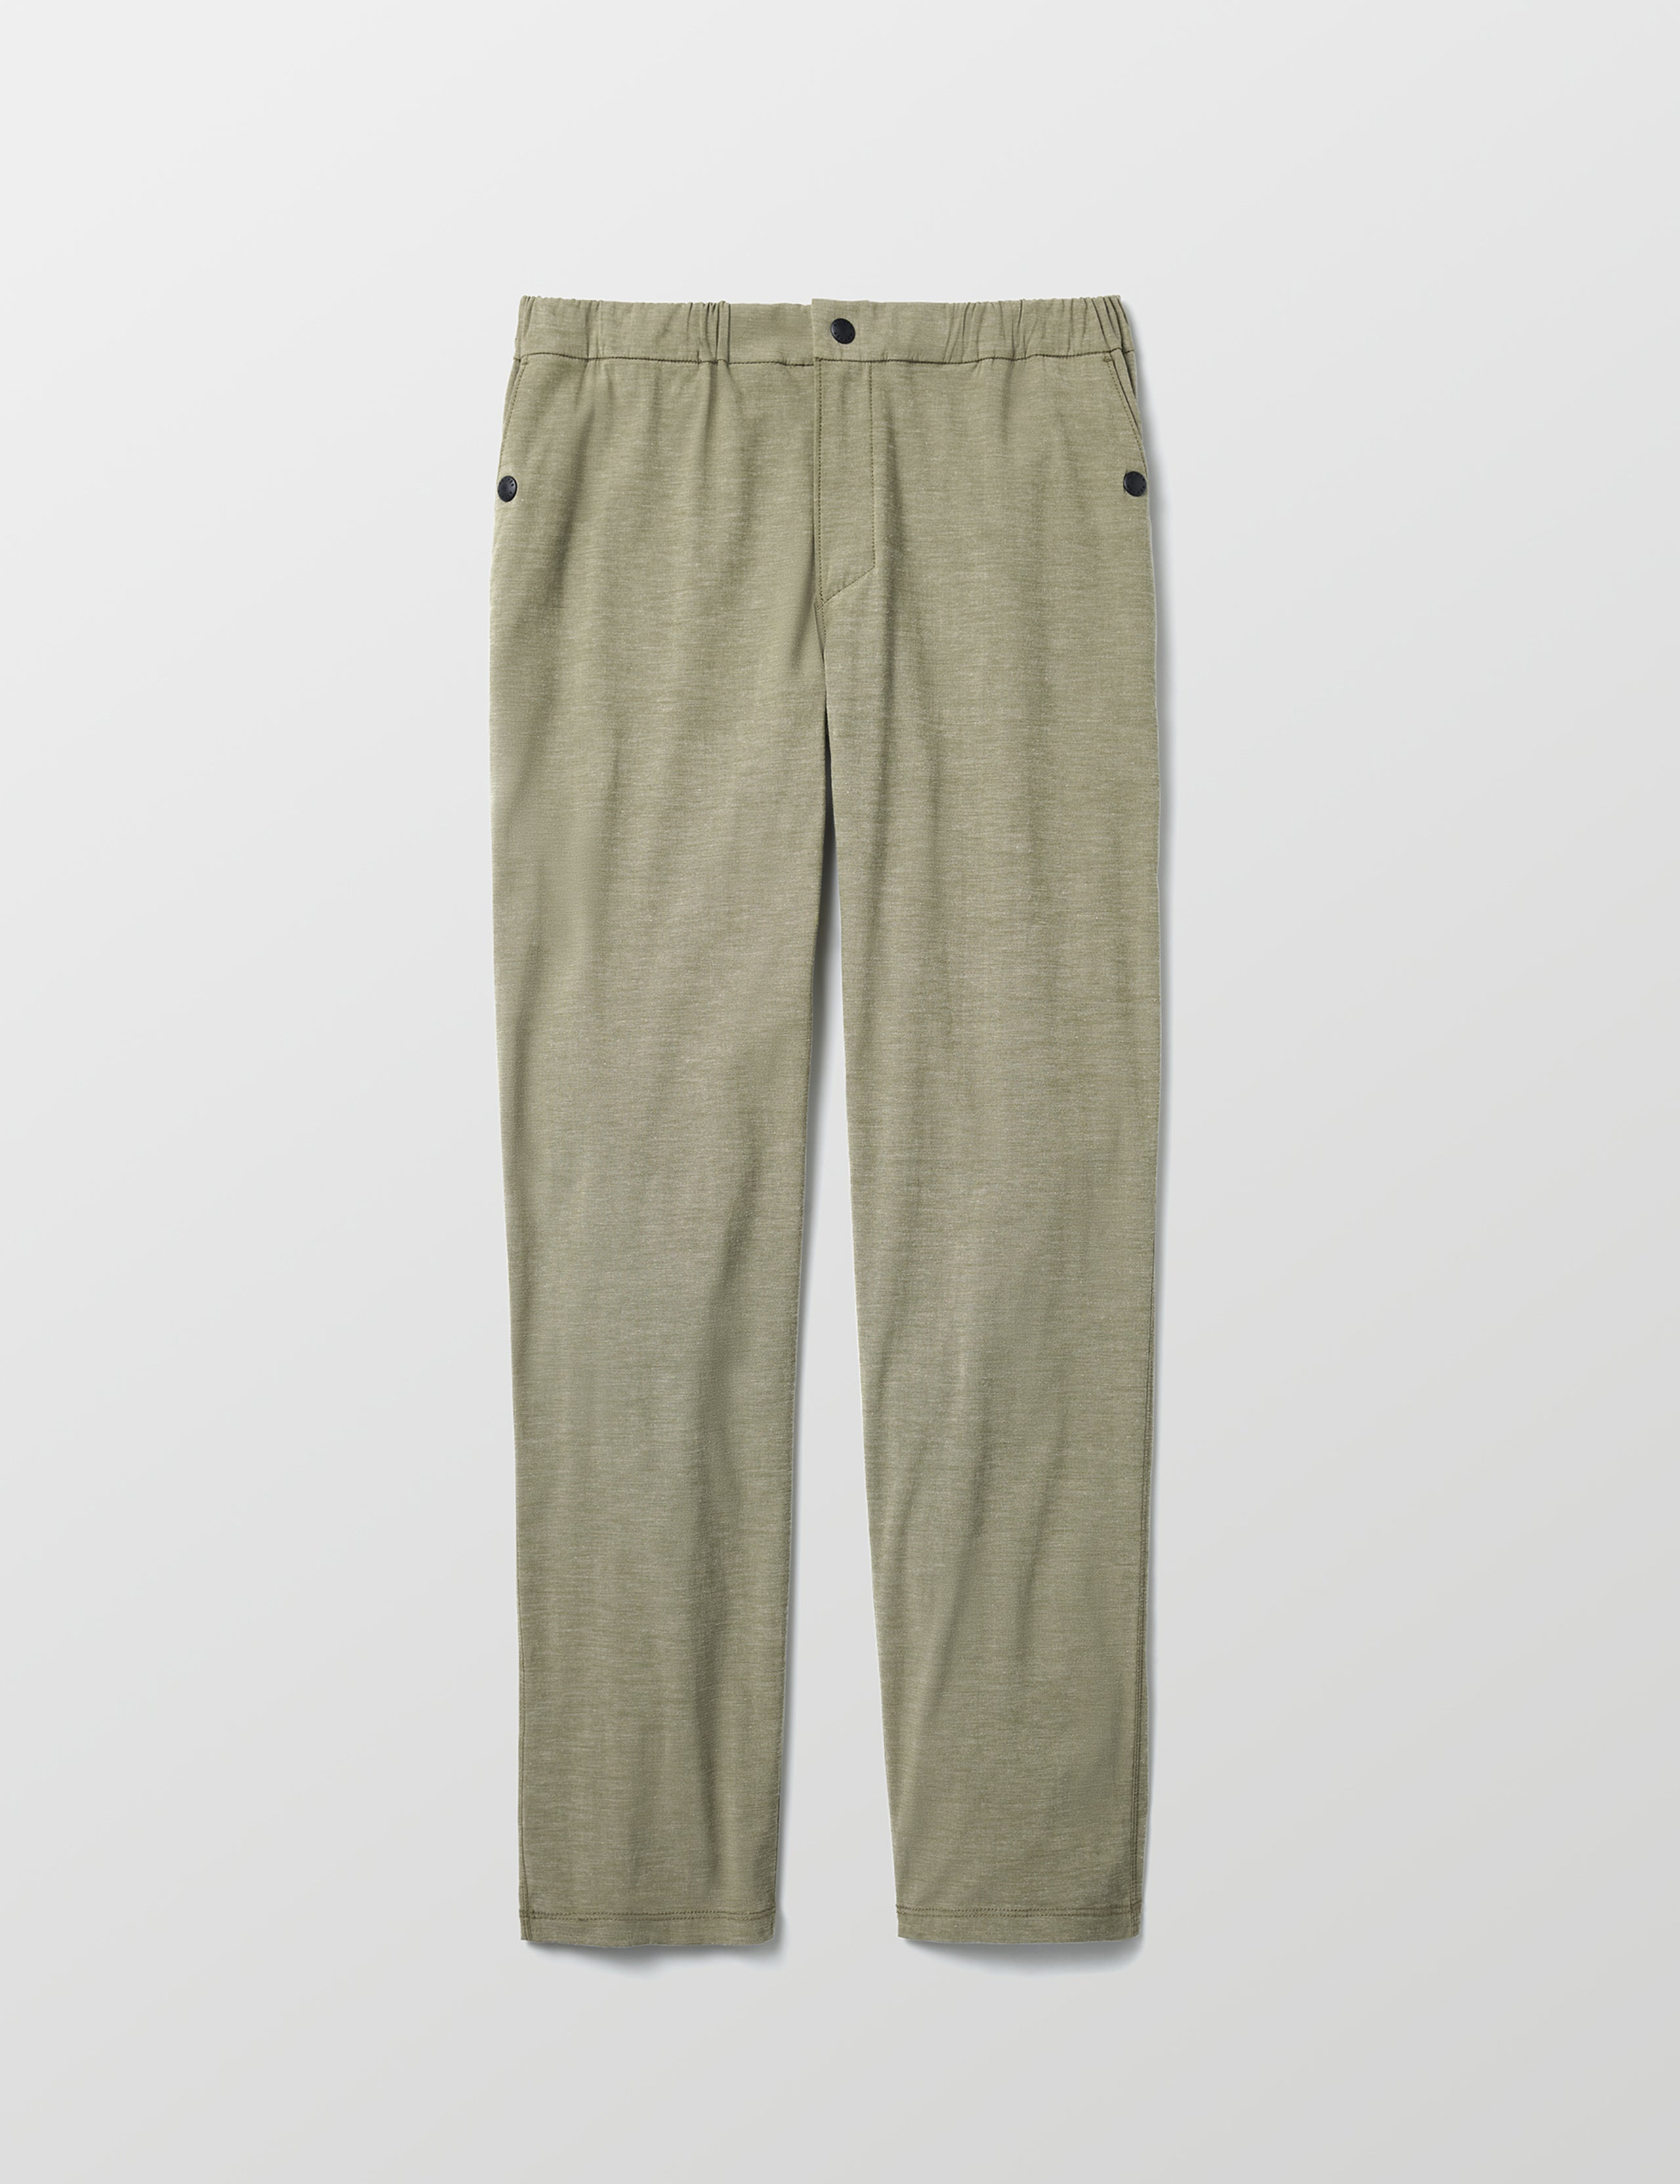 green water-resistant pants from AETHER Apparel